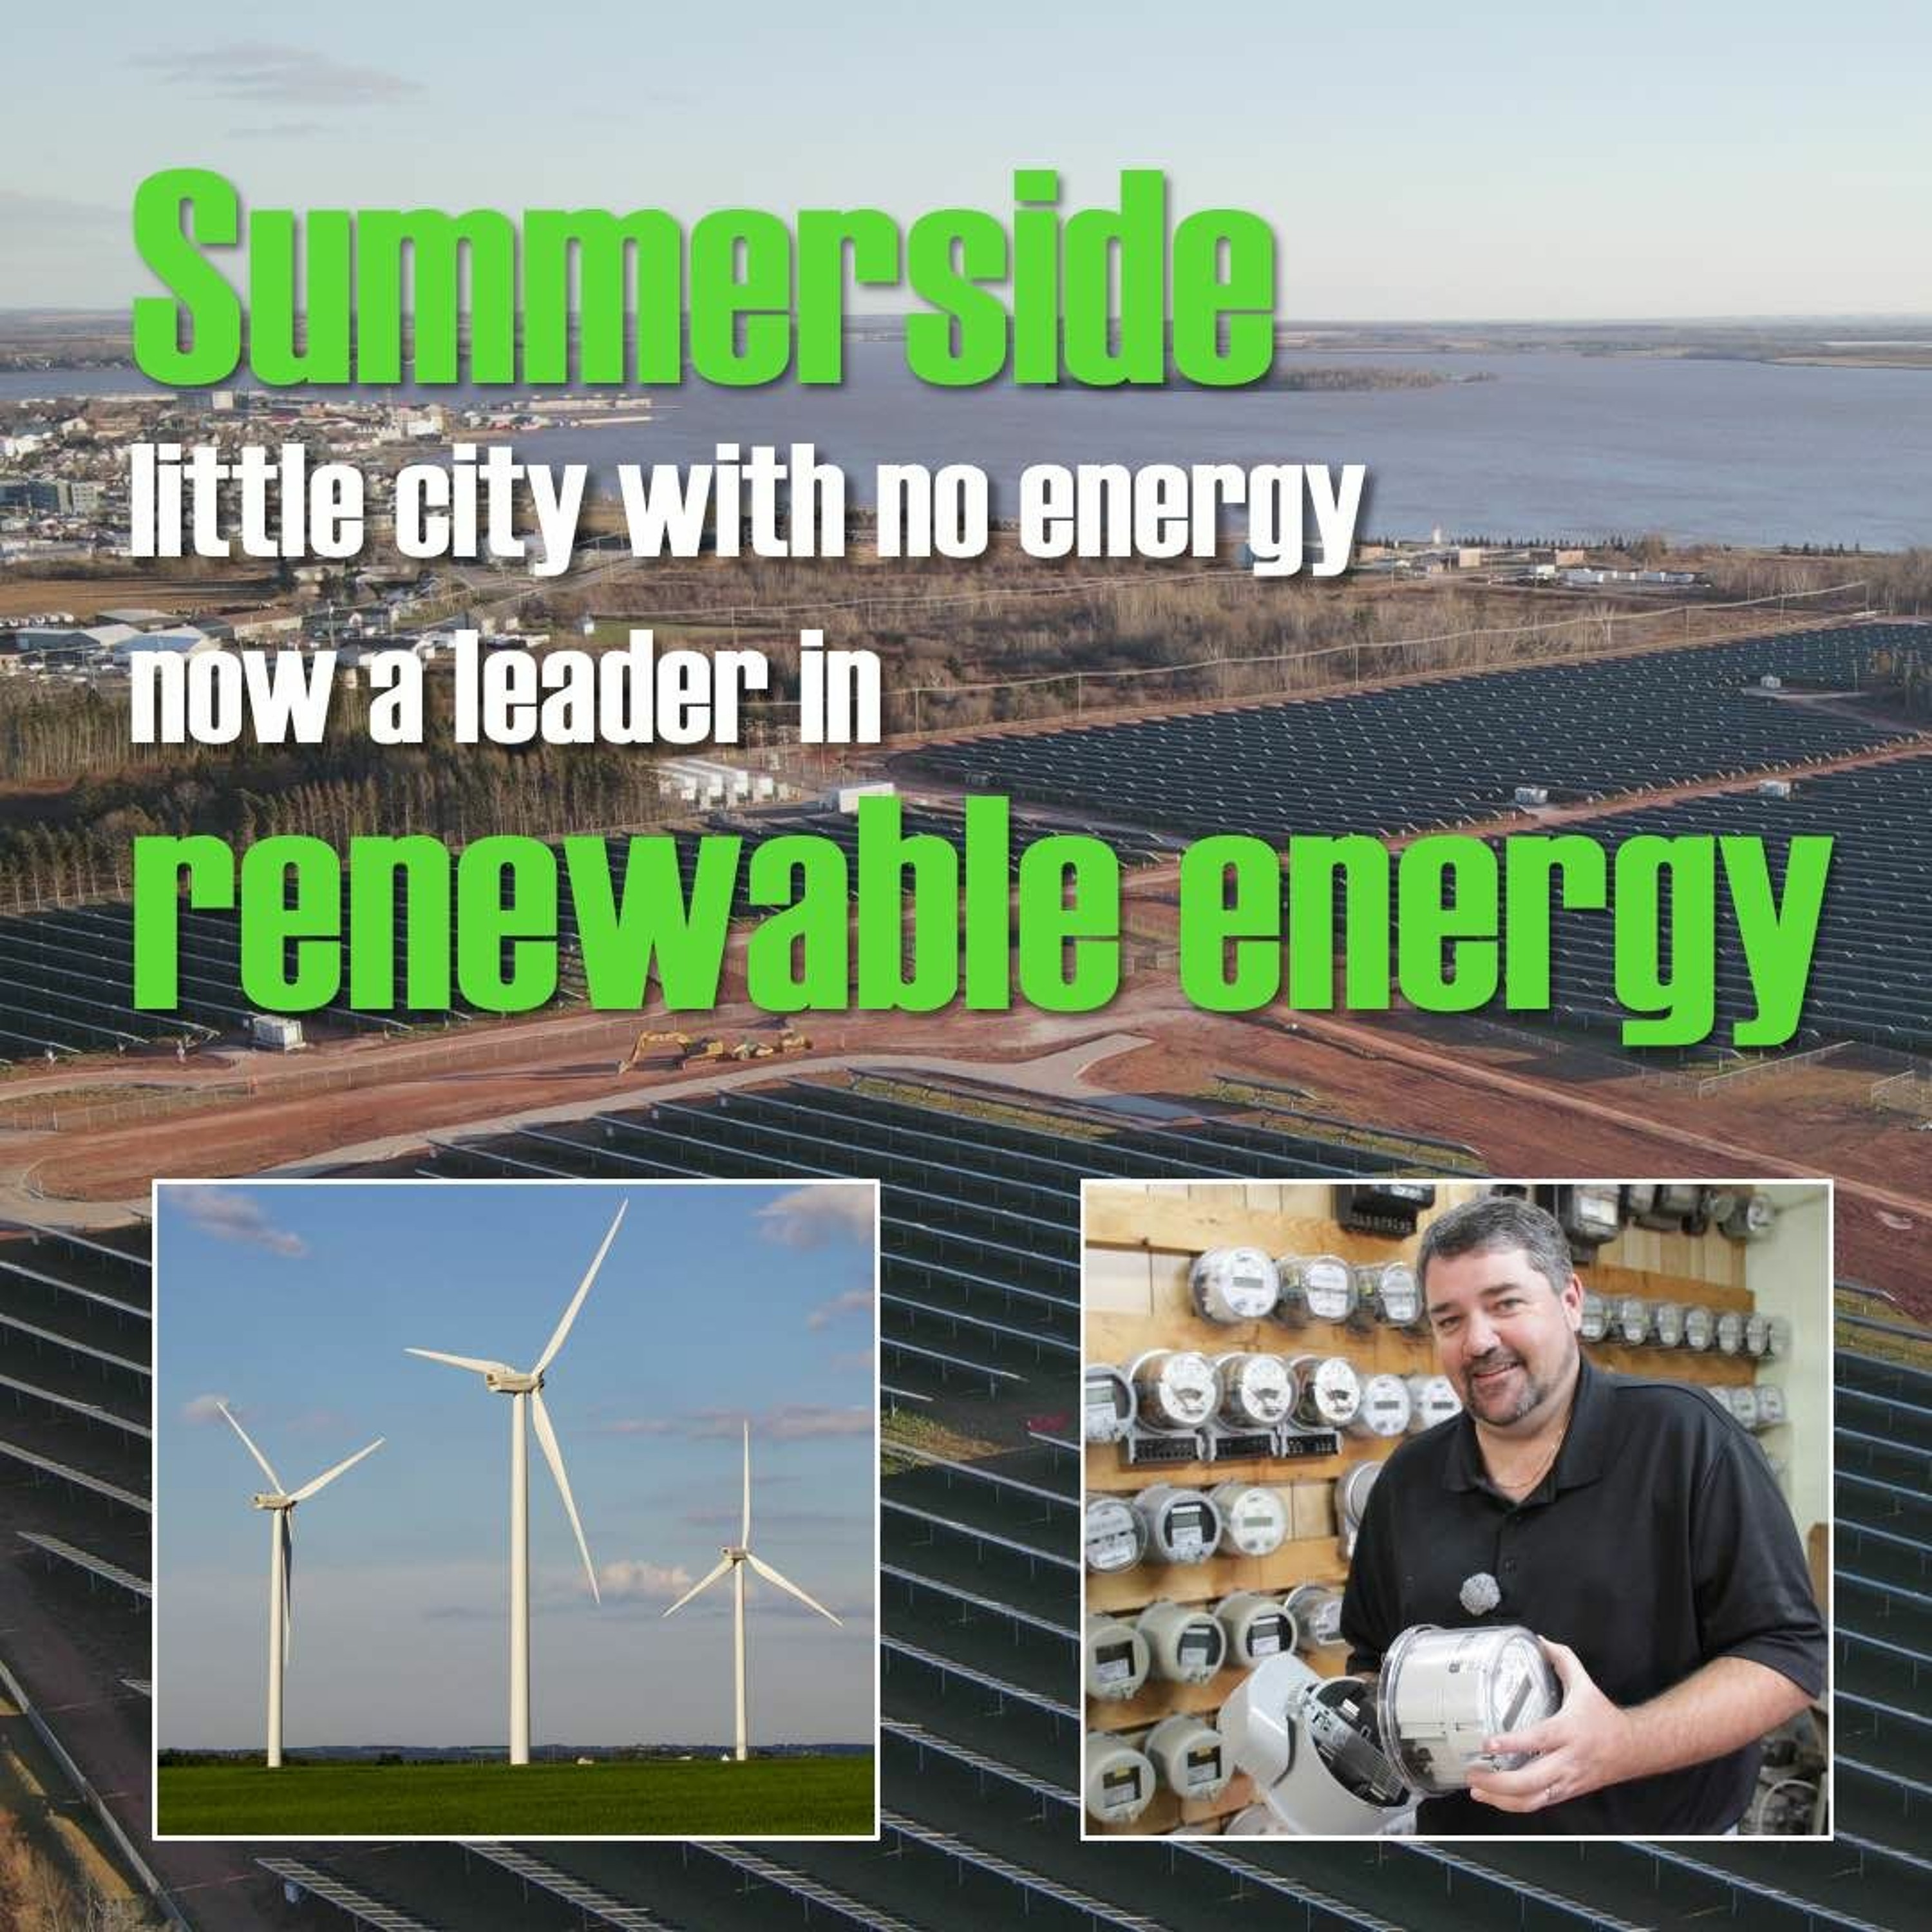 377A. Summerside little city with no energy now a leader in renewable energy